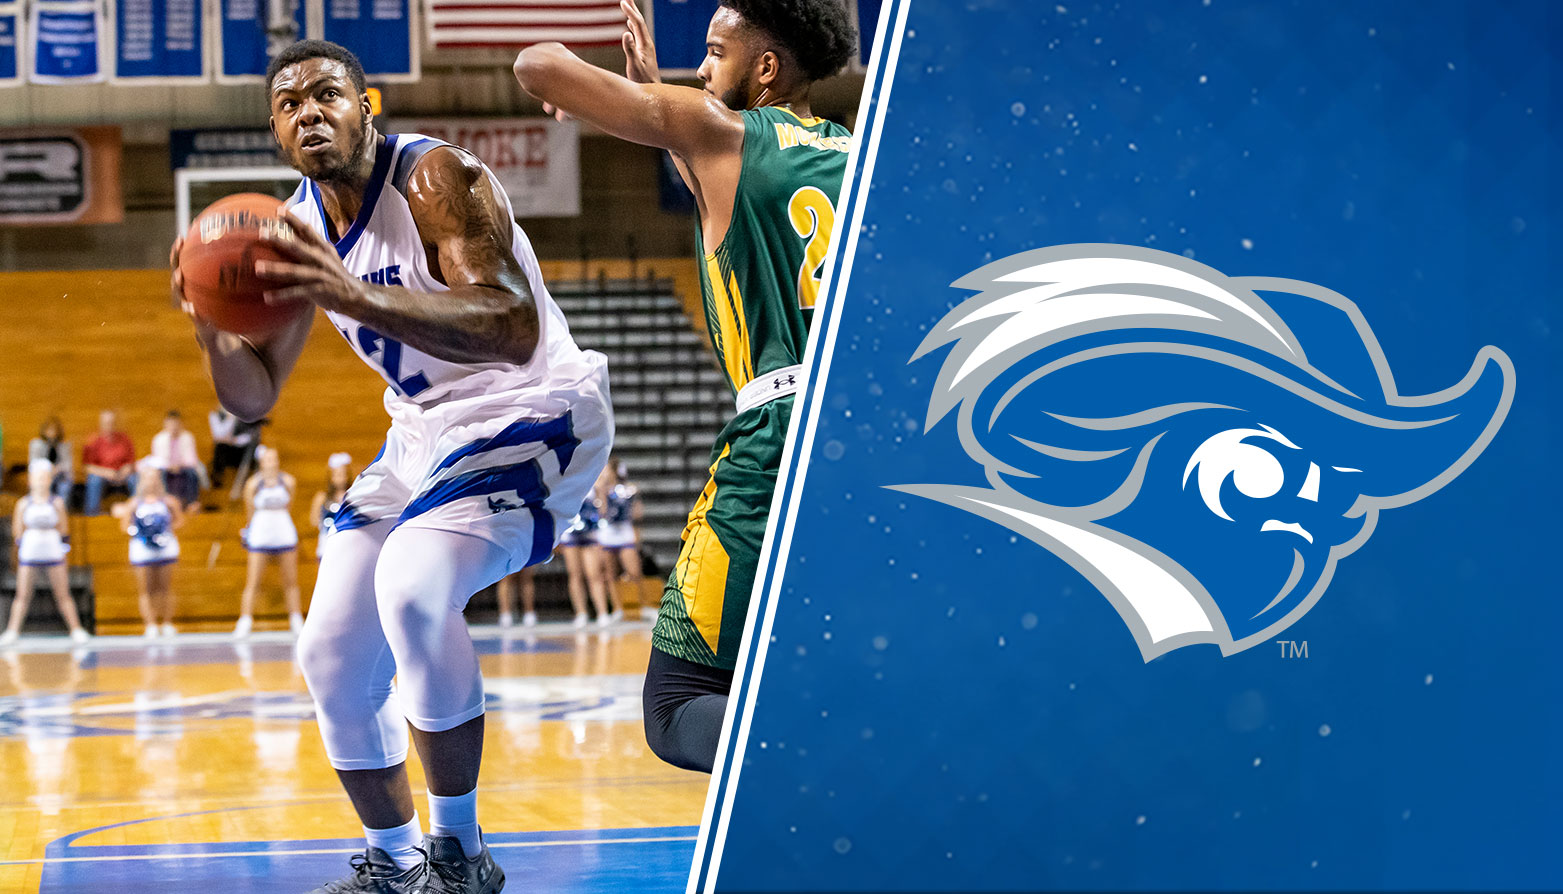 Christopher Newport's Savonte Chappell Named CAC Men's Basketball Player of the Week